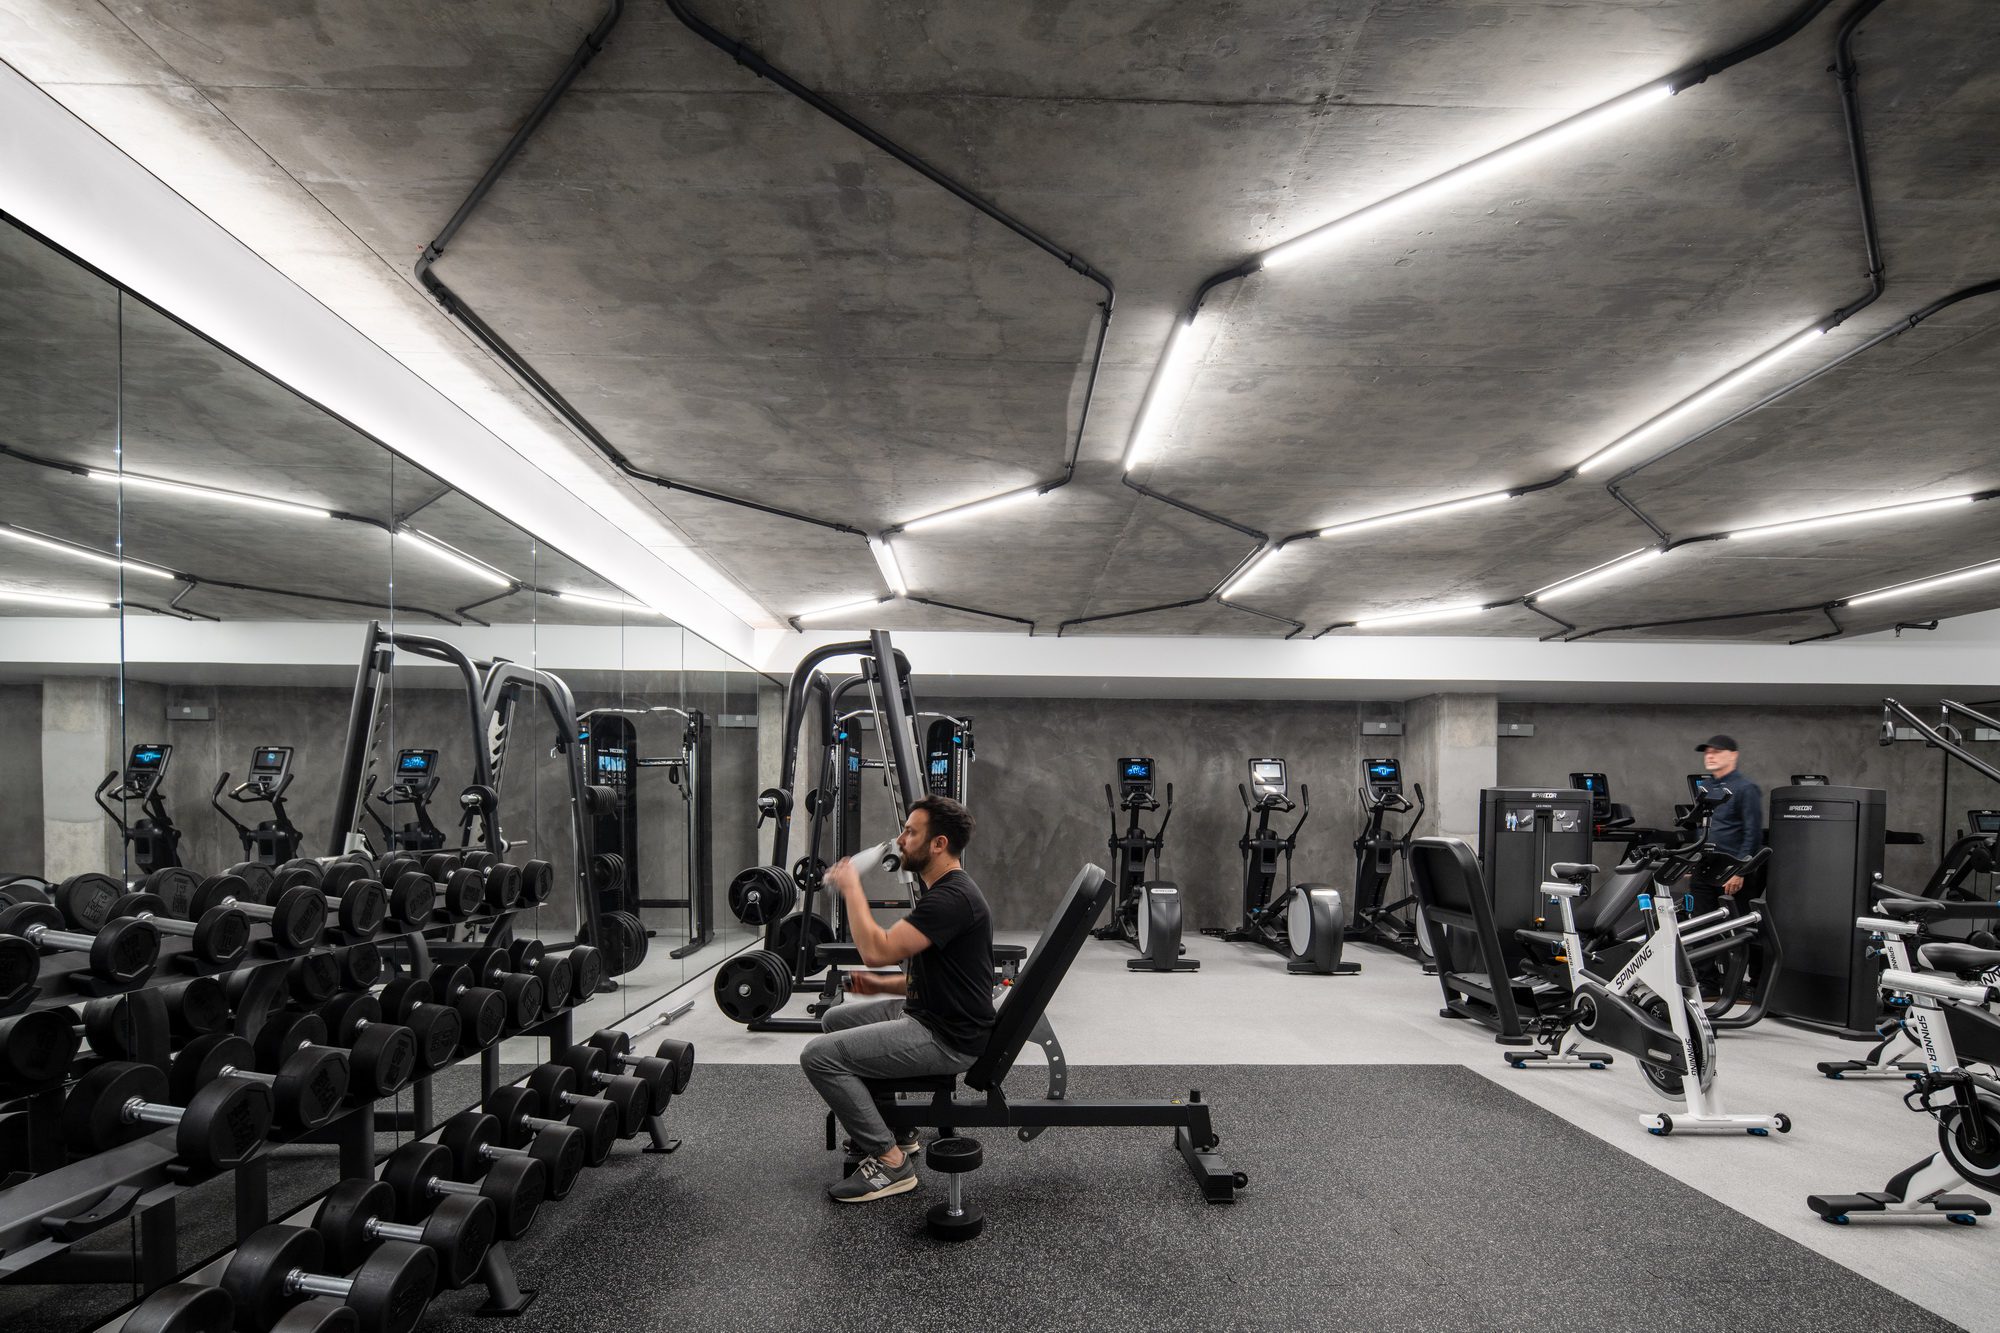 Fitness centre with honeycomb lighting overhead